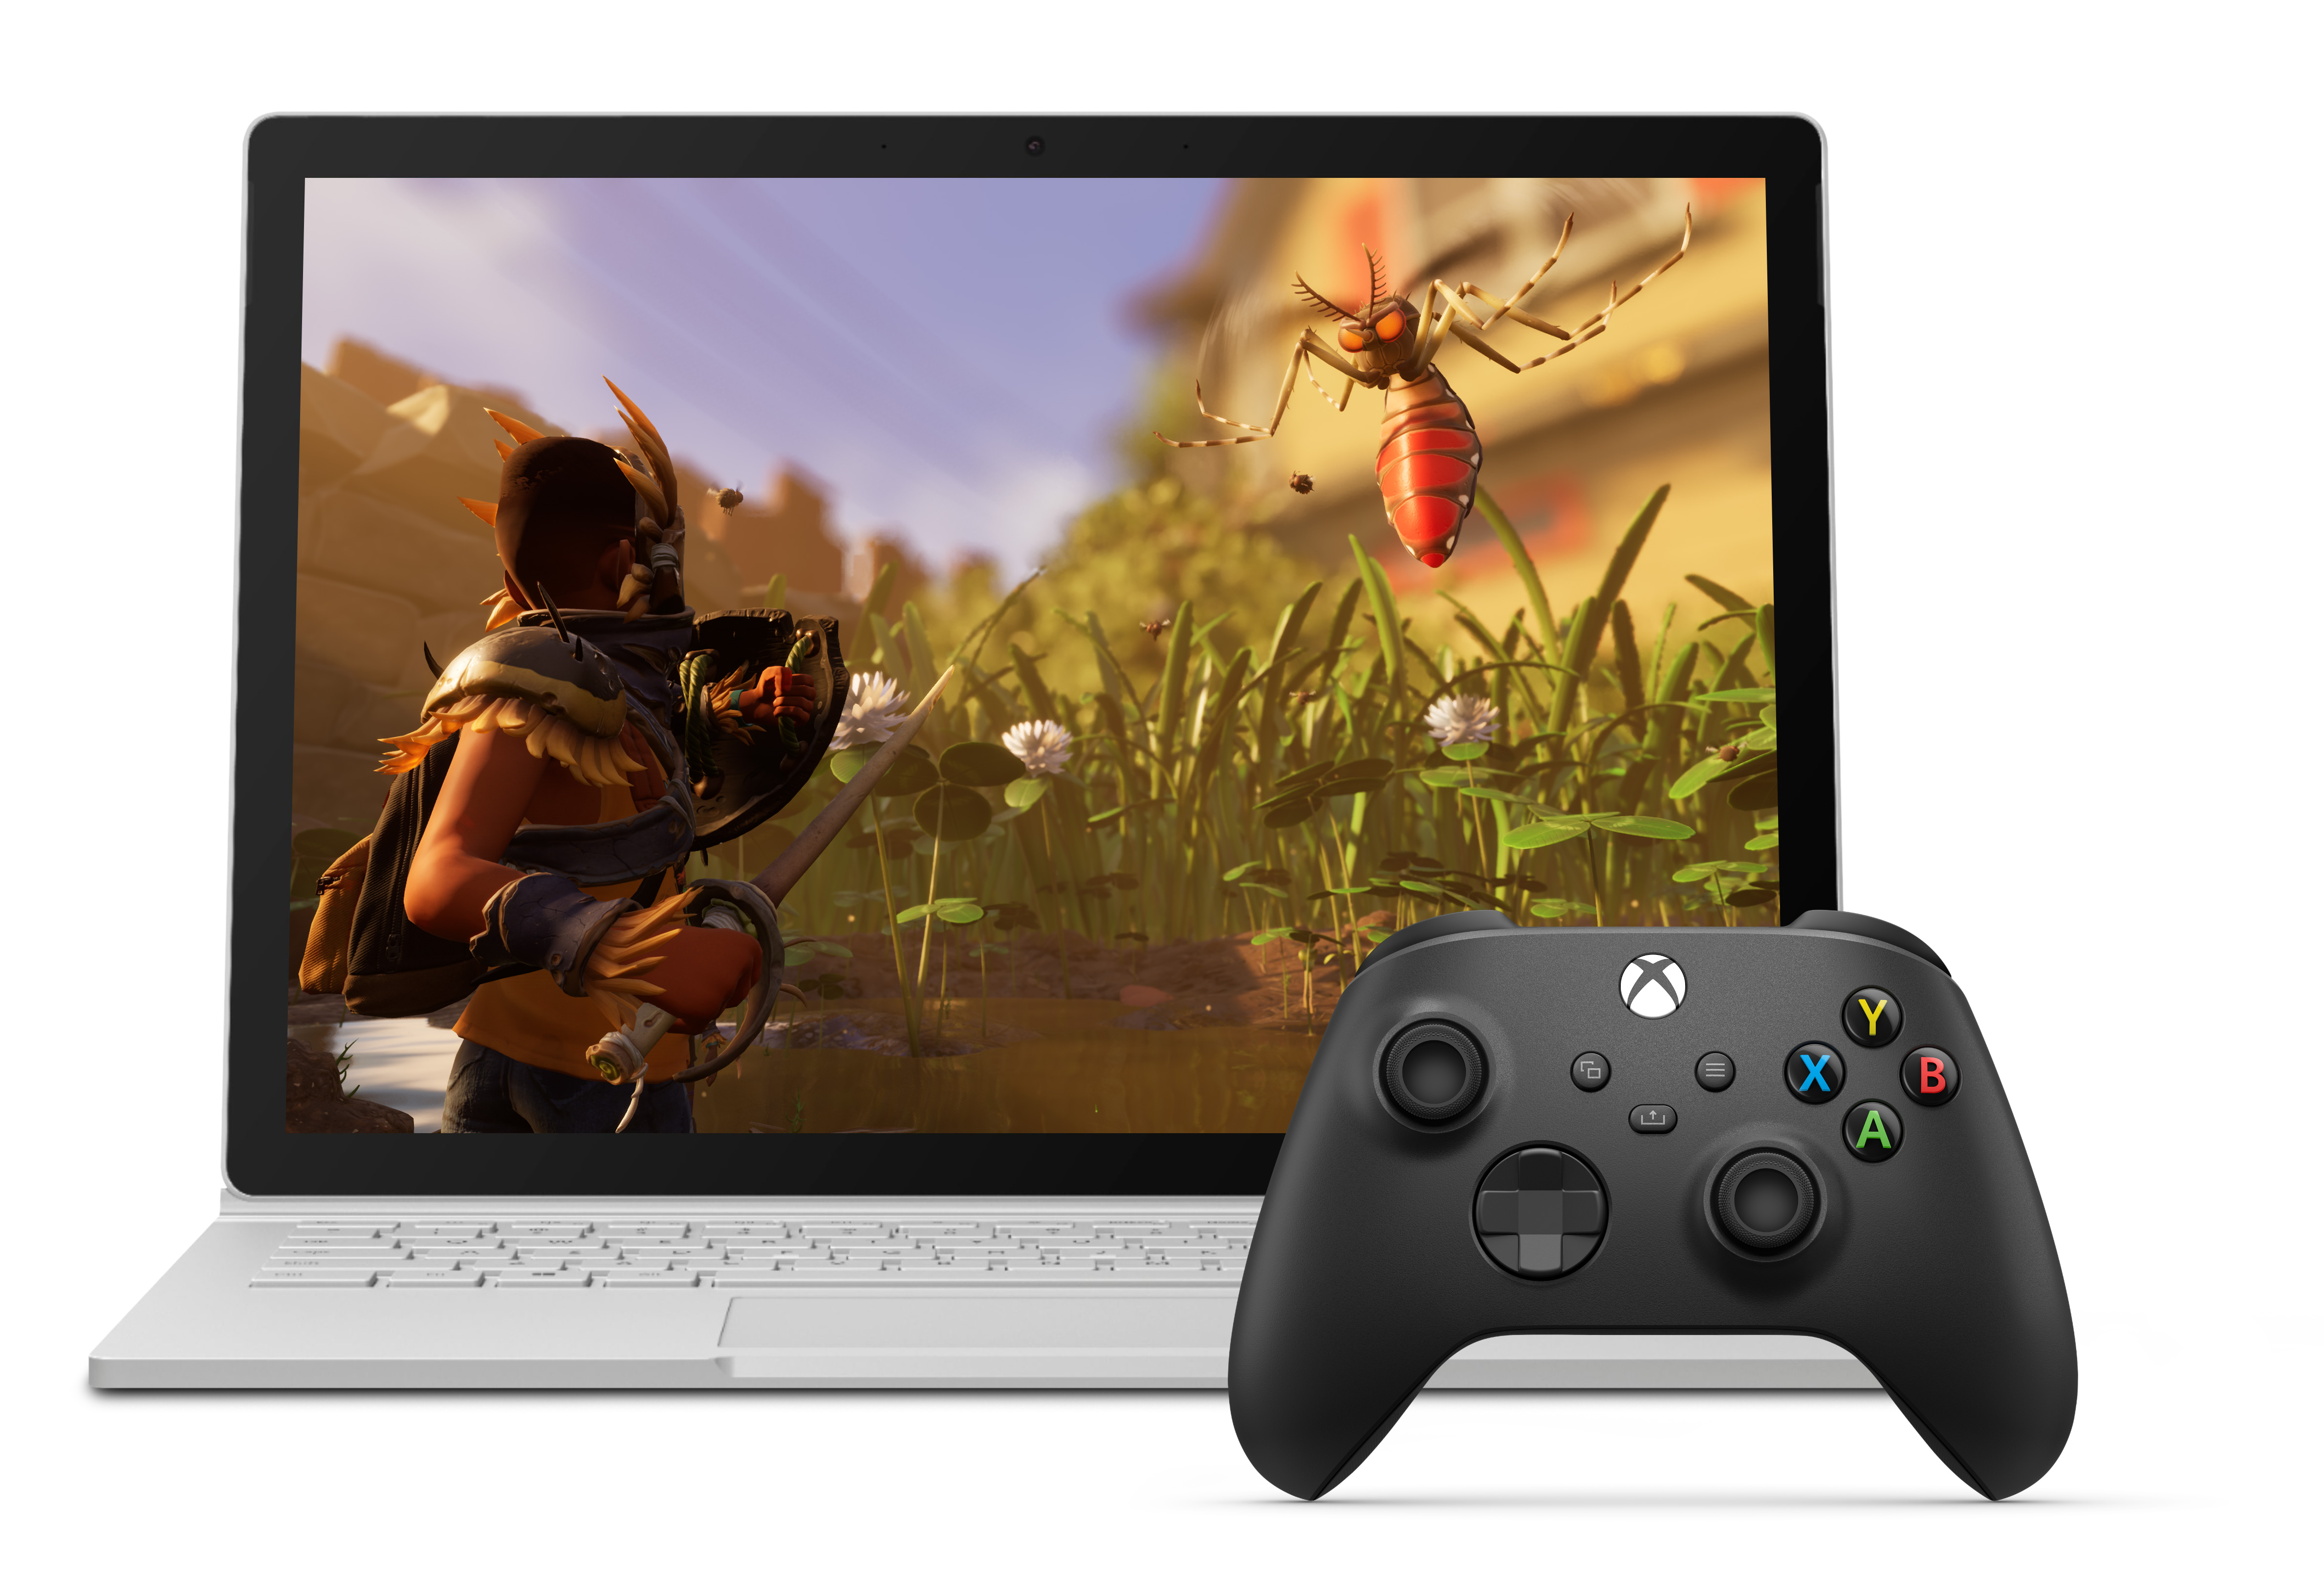 Xbox Cloud Gaming: What Devices Are Currently Supported?